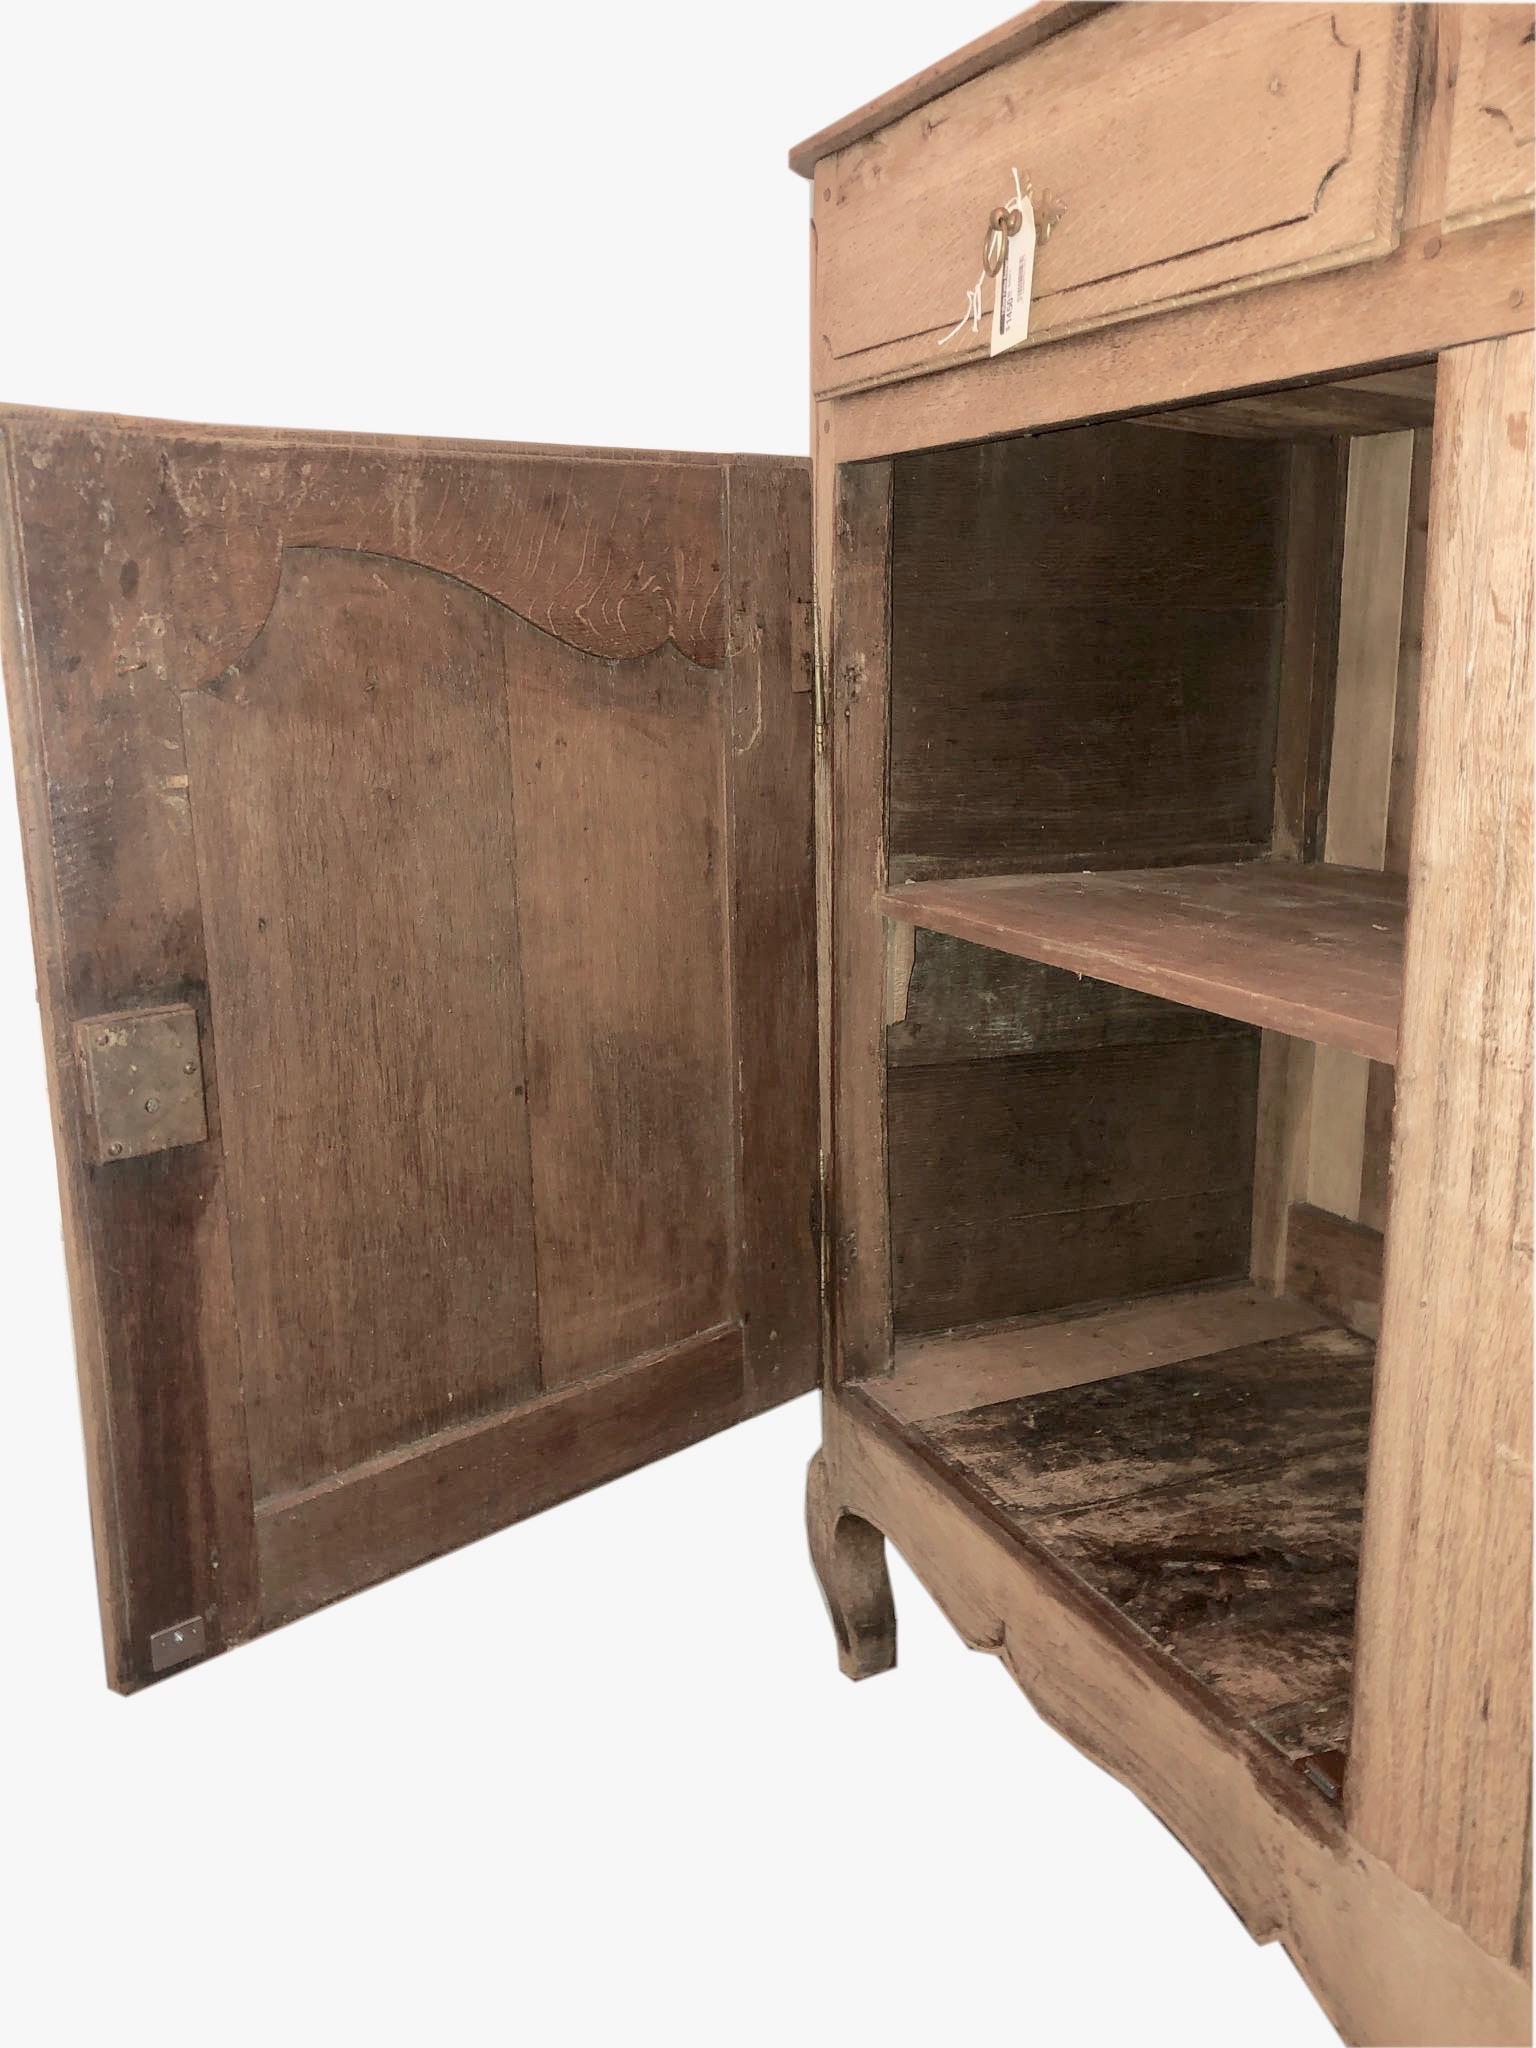 18th century credenza buffet cabinet, of bleached oak, in the Provençal, having a molded rectangular top, over apron of 2 drawers, double cupboard doors open on iron hinges, shaped apron raised on cabriole legs. All hardware is original.